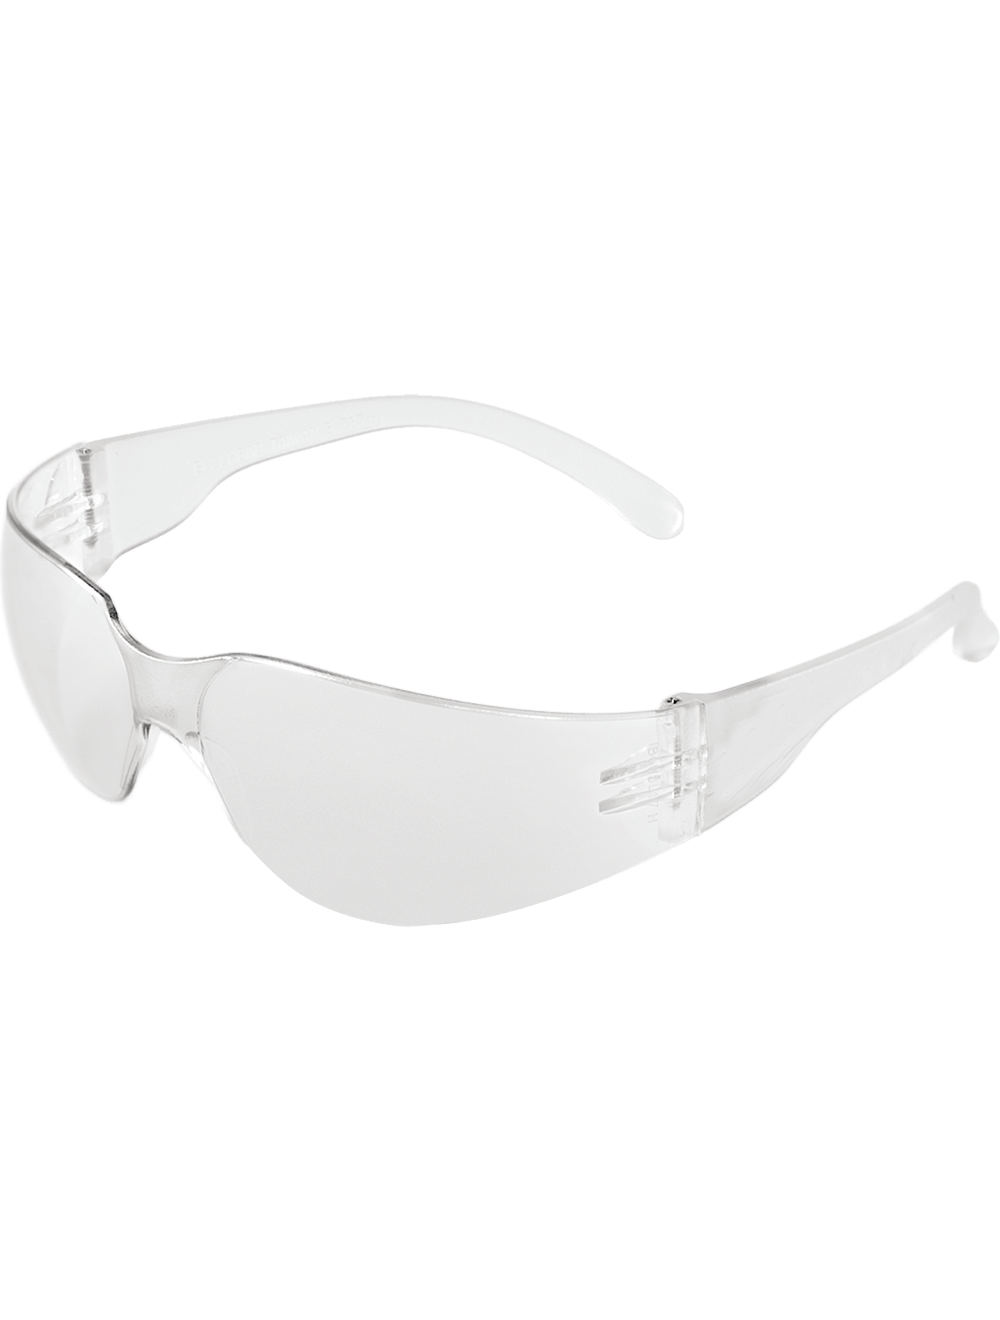 Torrent™ Clear Lens, Frosted Clear Frame Safety Glasses - BH111